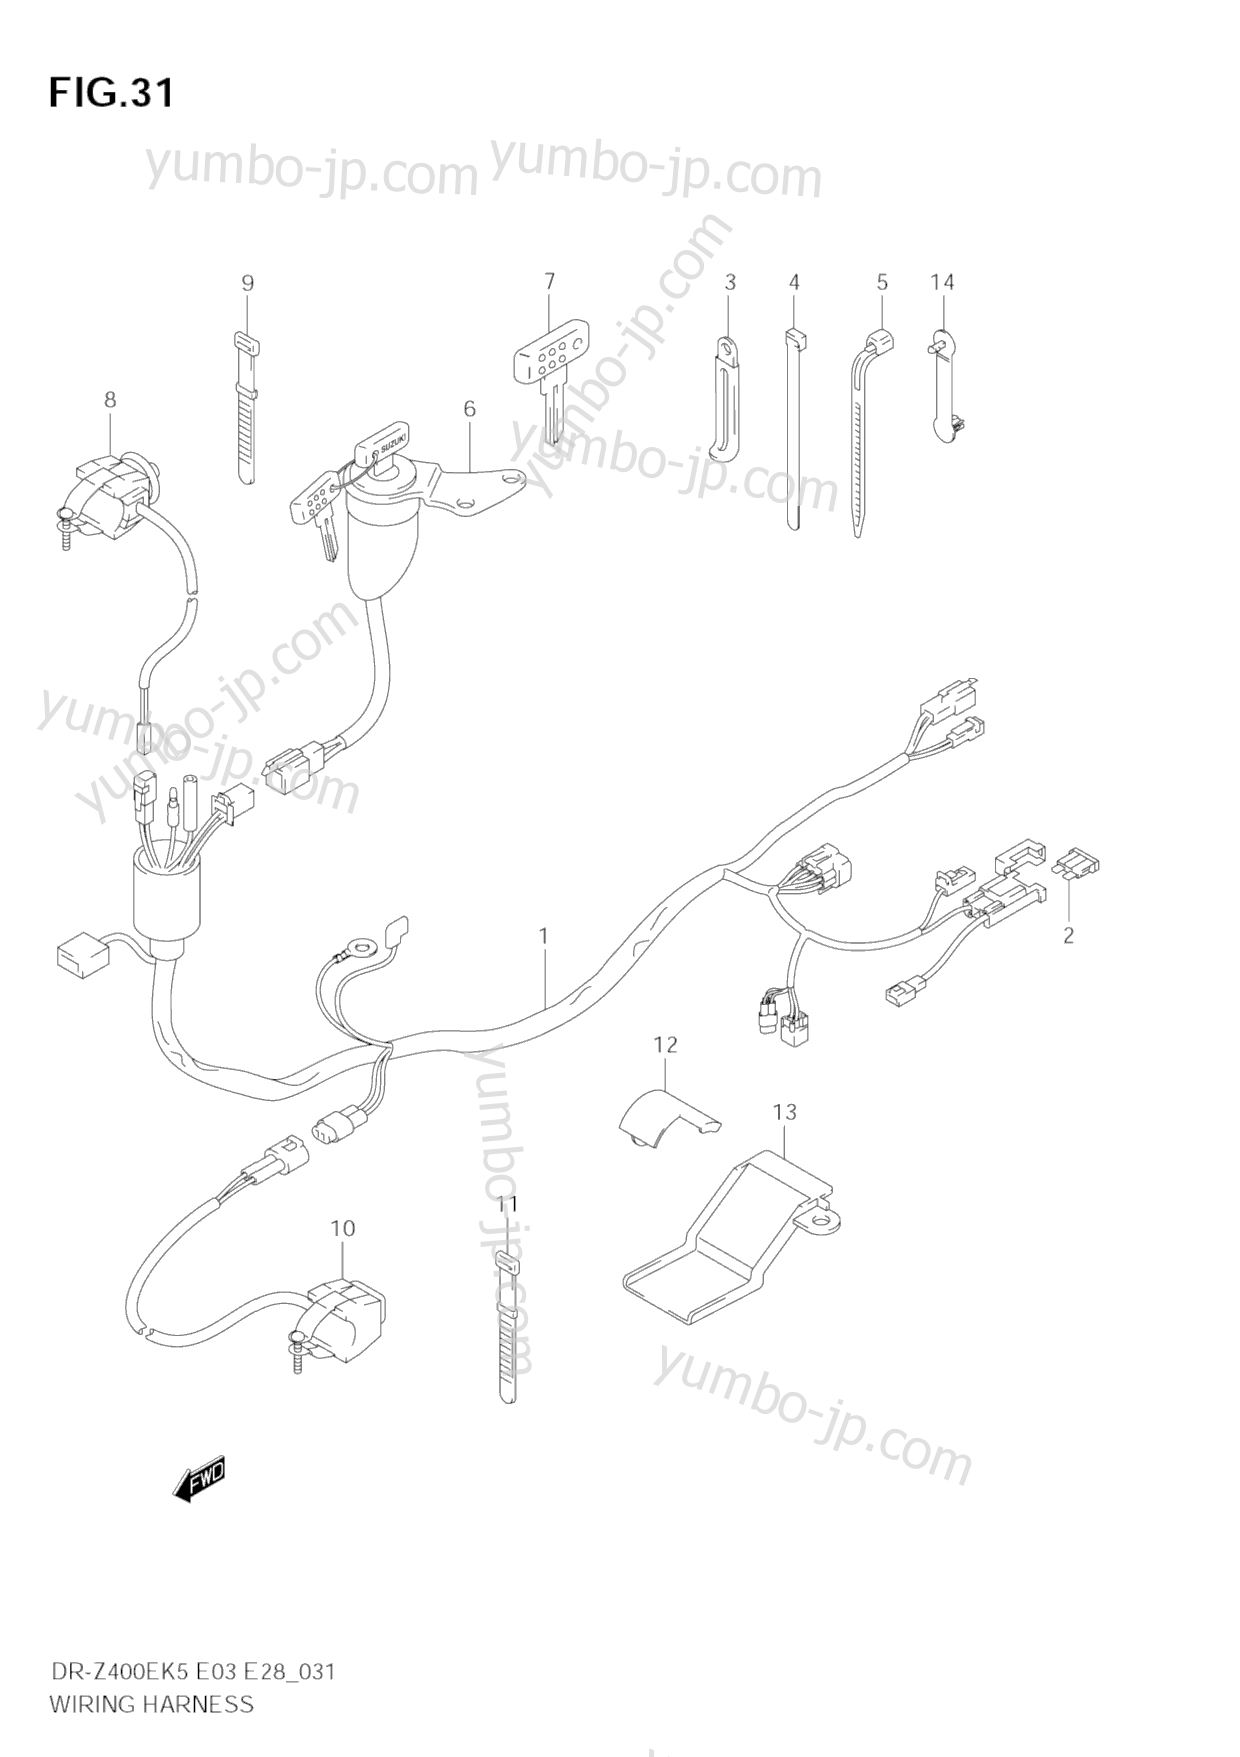 WIRING HARNESS for motorcycles SUZUKI DR-Z400E 2005 year